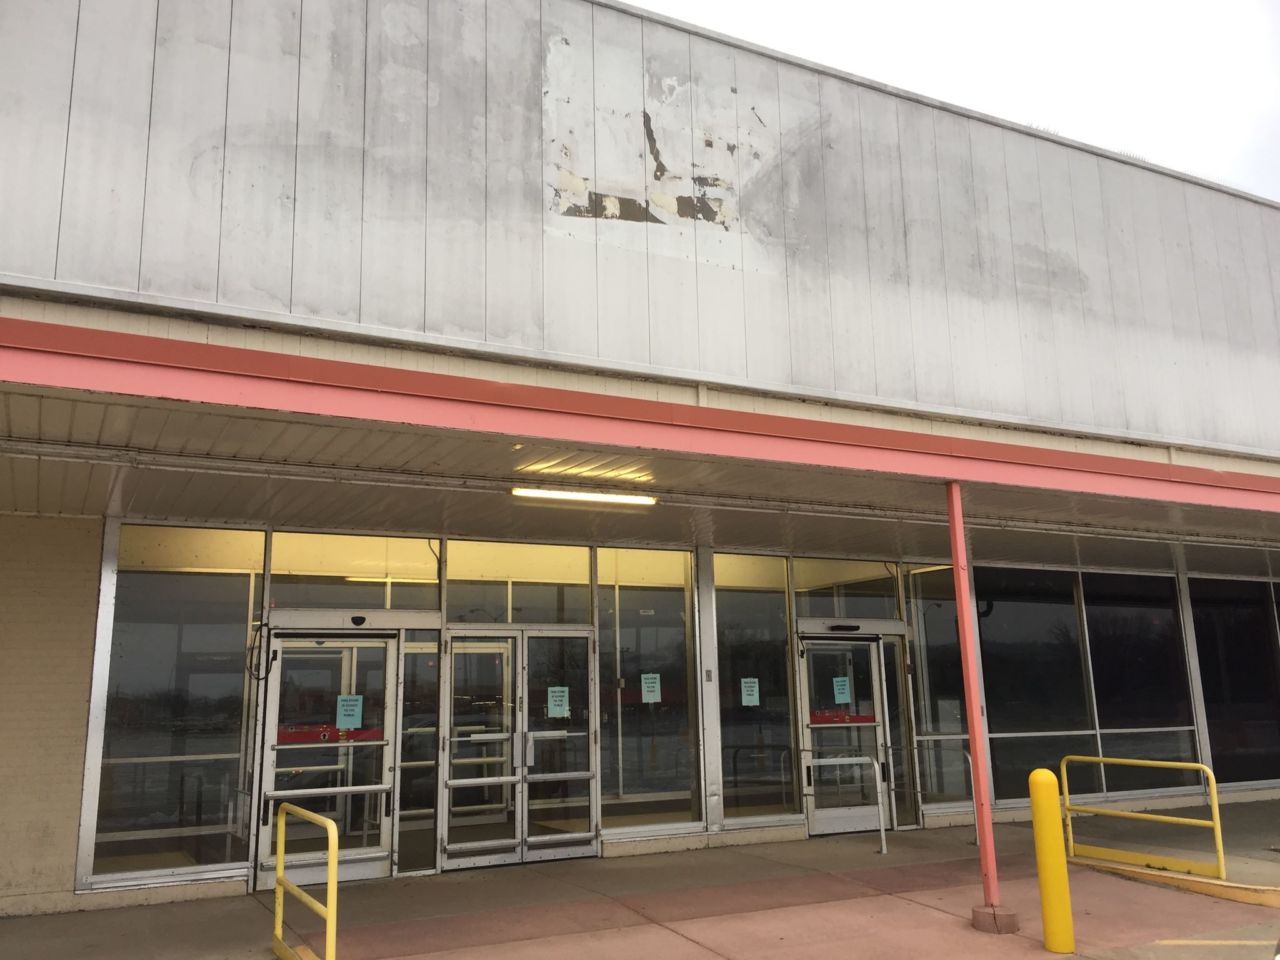 Kmart site redevelopment attracts popular retailers: A Place in